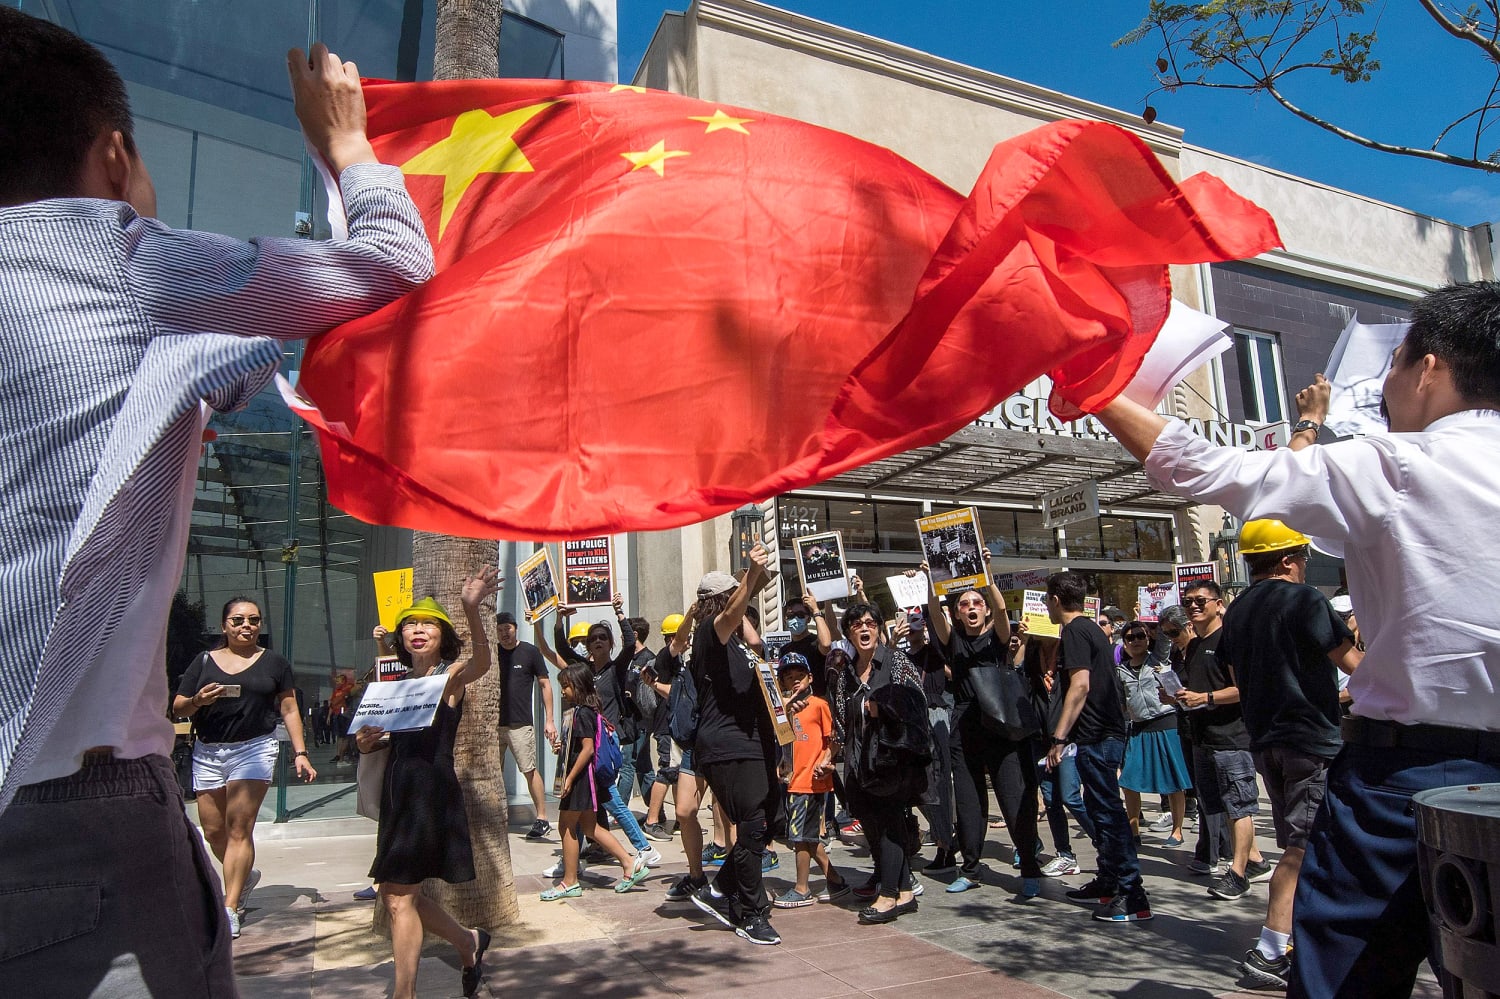 Pro-Hong Kong demonstrations in U.S. met with China-supporting  counterprotesters